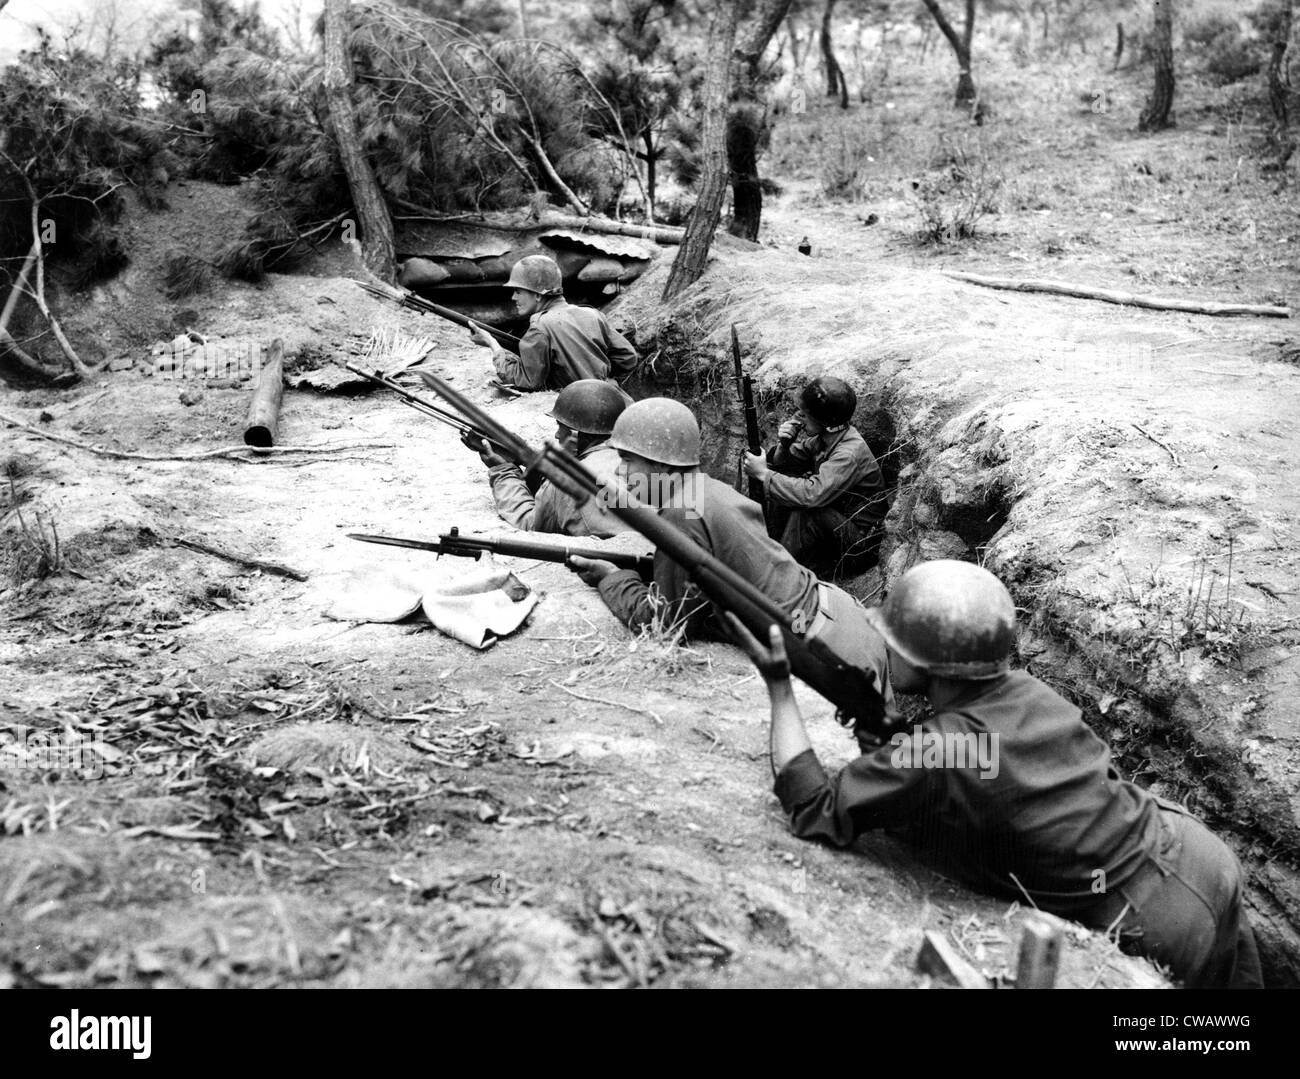 Korean War: American soldiers in the trenches, Korea, 1950. Courtesy Everett/CSU Archives Stock Photo